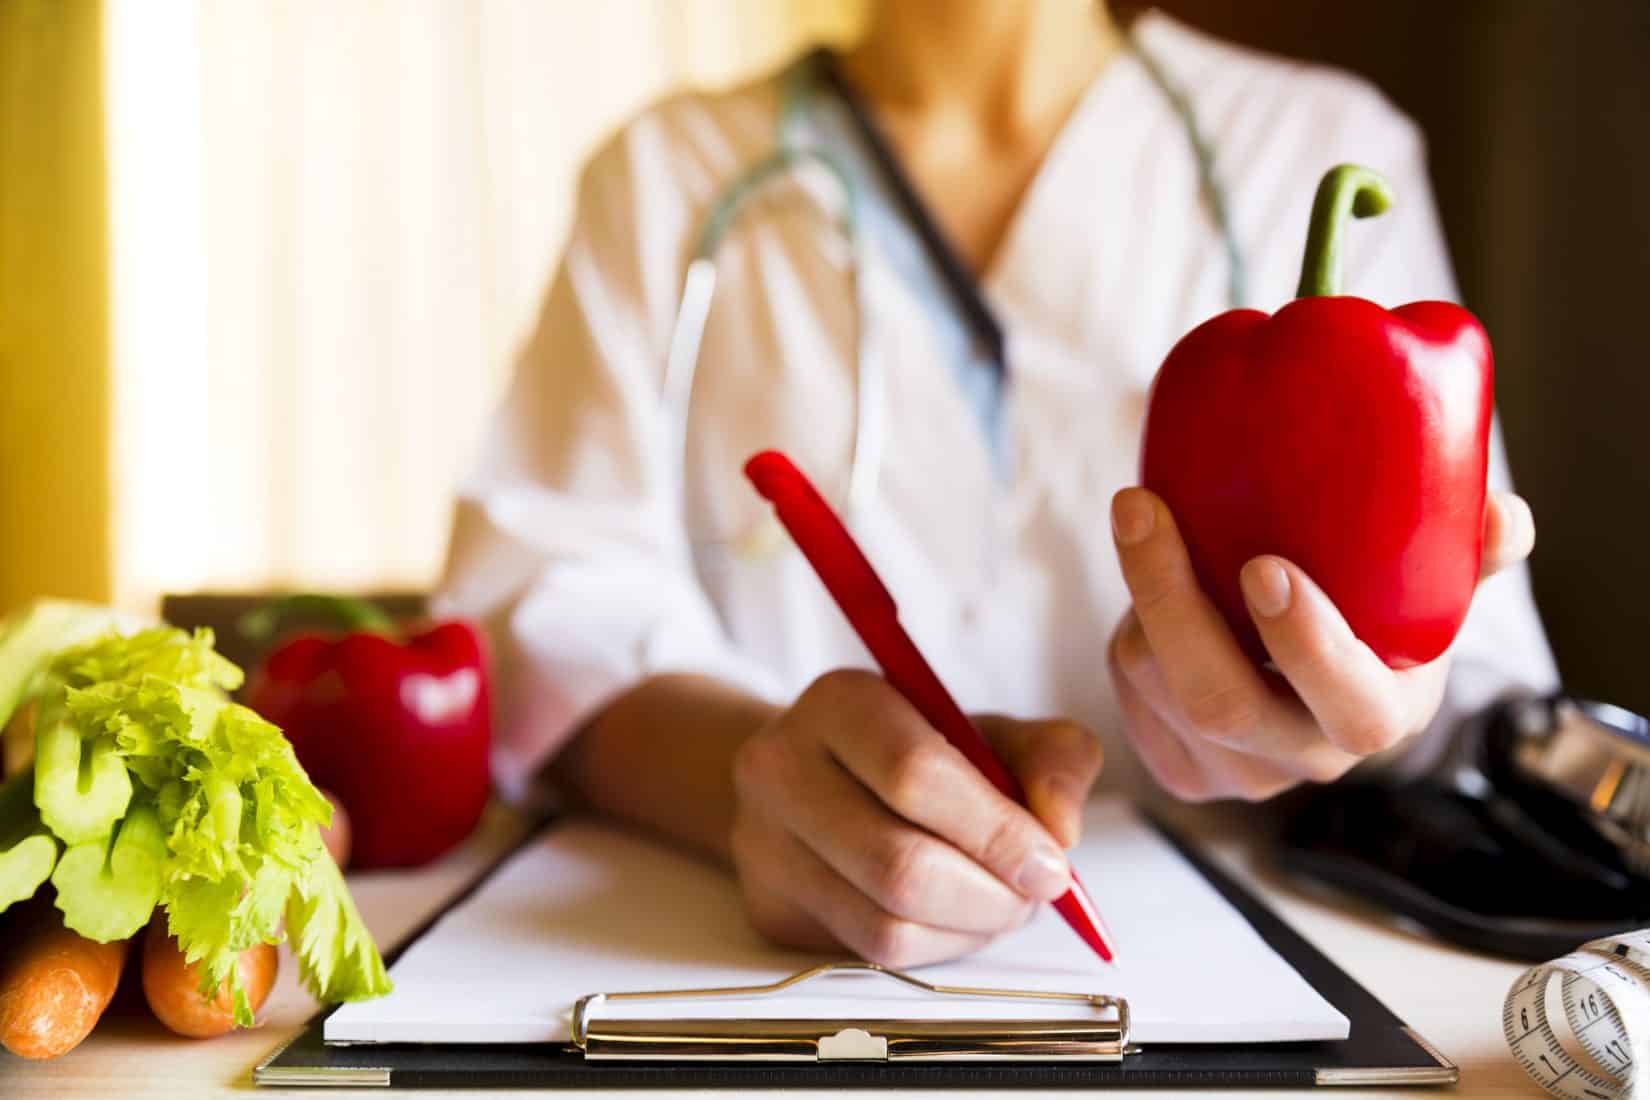 Woman holding up apple whlie writing something with a pen - Medical Weight Loss Program and Prescription Weight Loss Injections